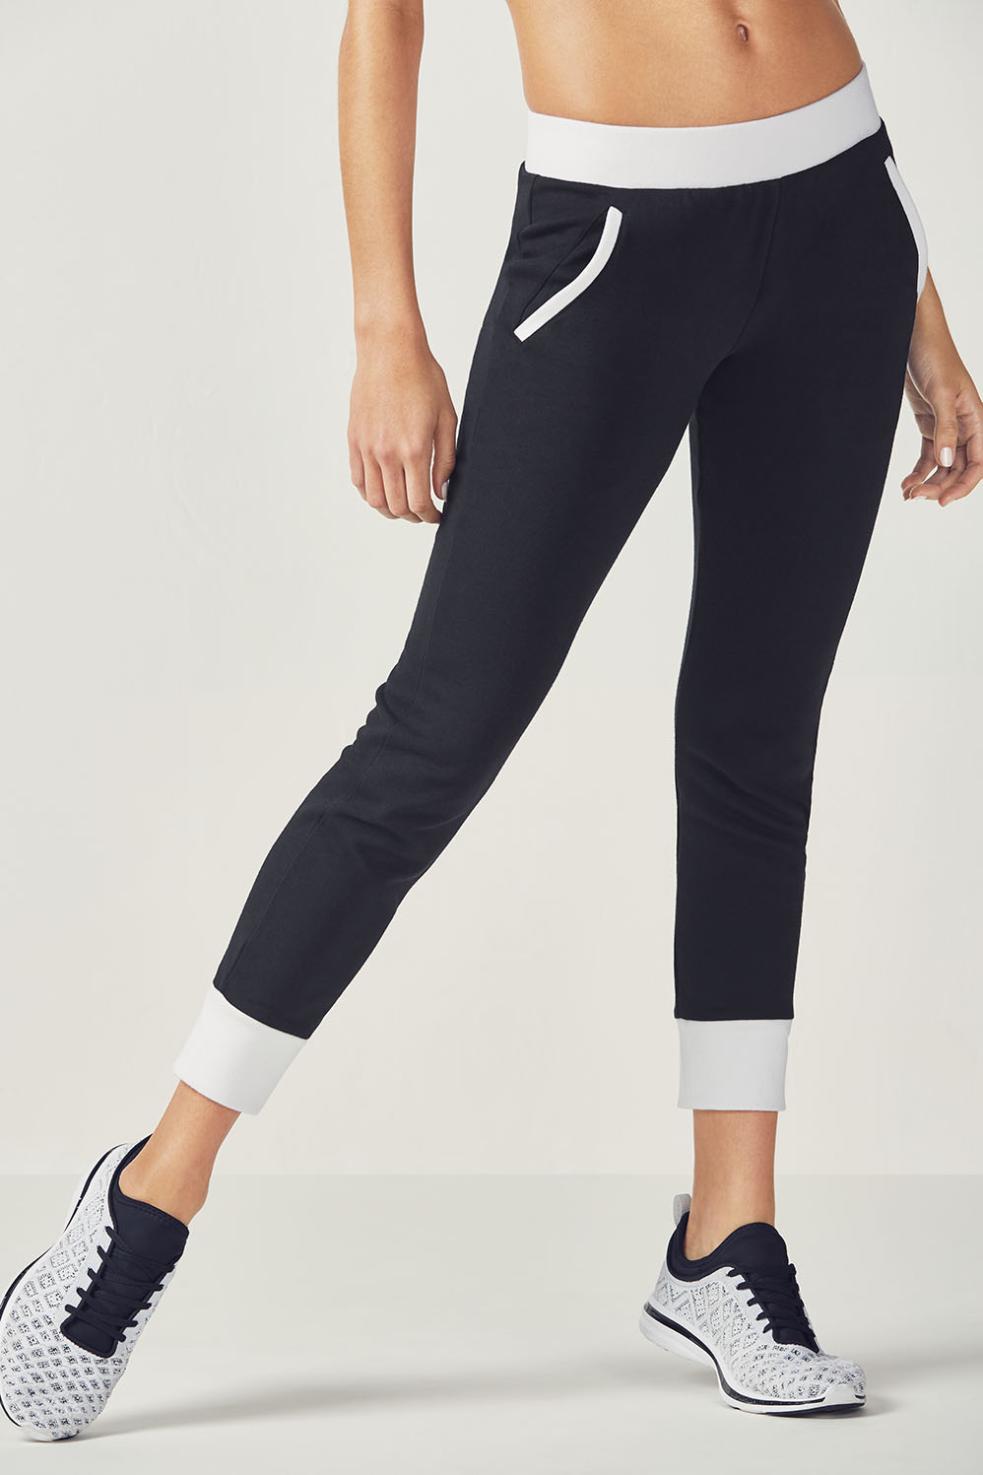 How Can I Choose the Right Yoga Pants for My Body Type?